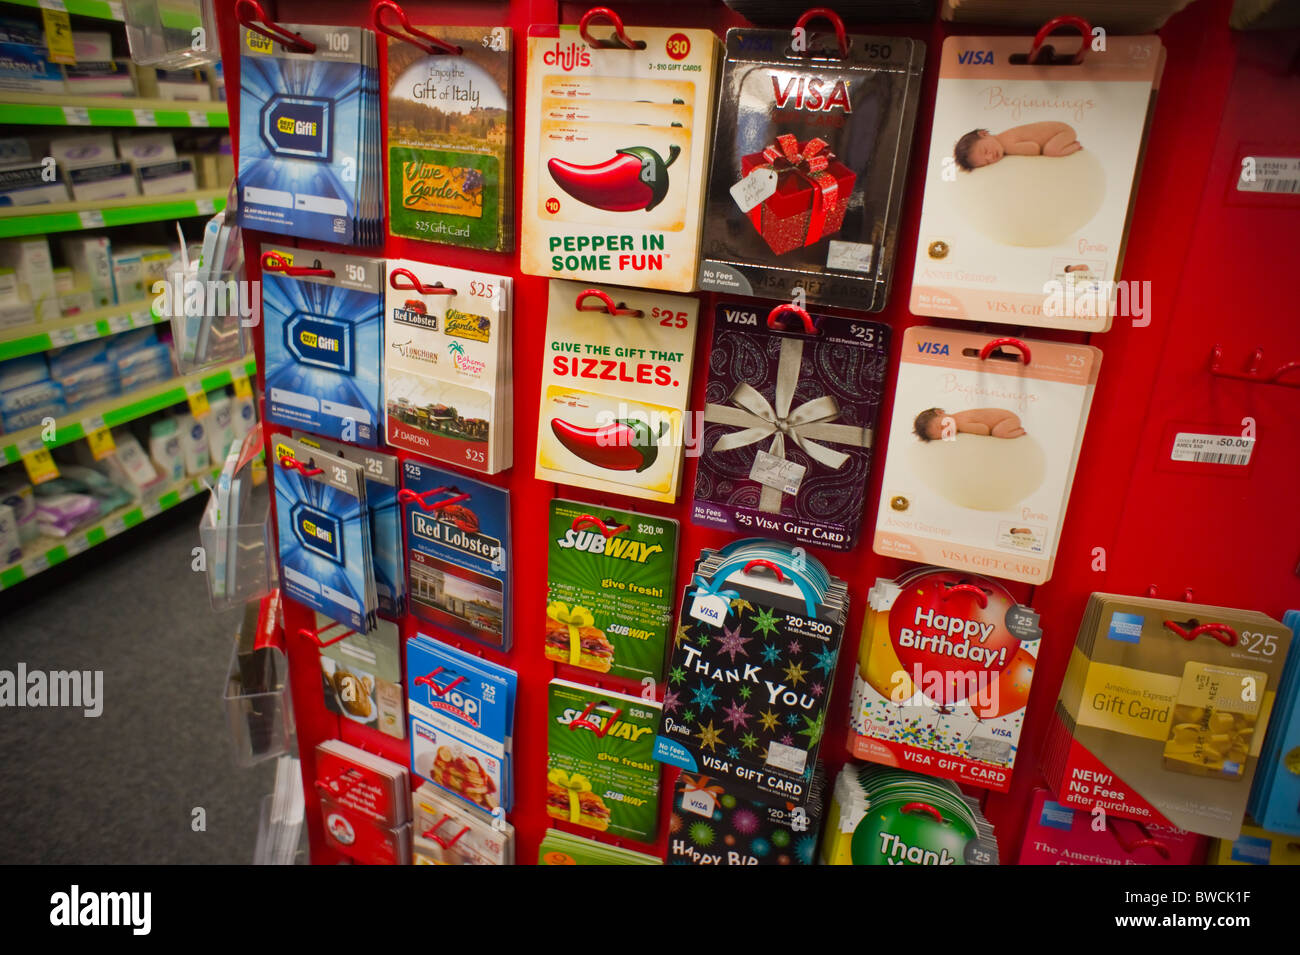 Gift Cards Store High Resolution Stock Photography and Images - Alamy